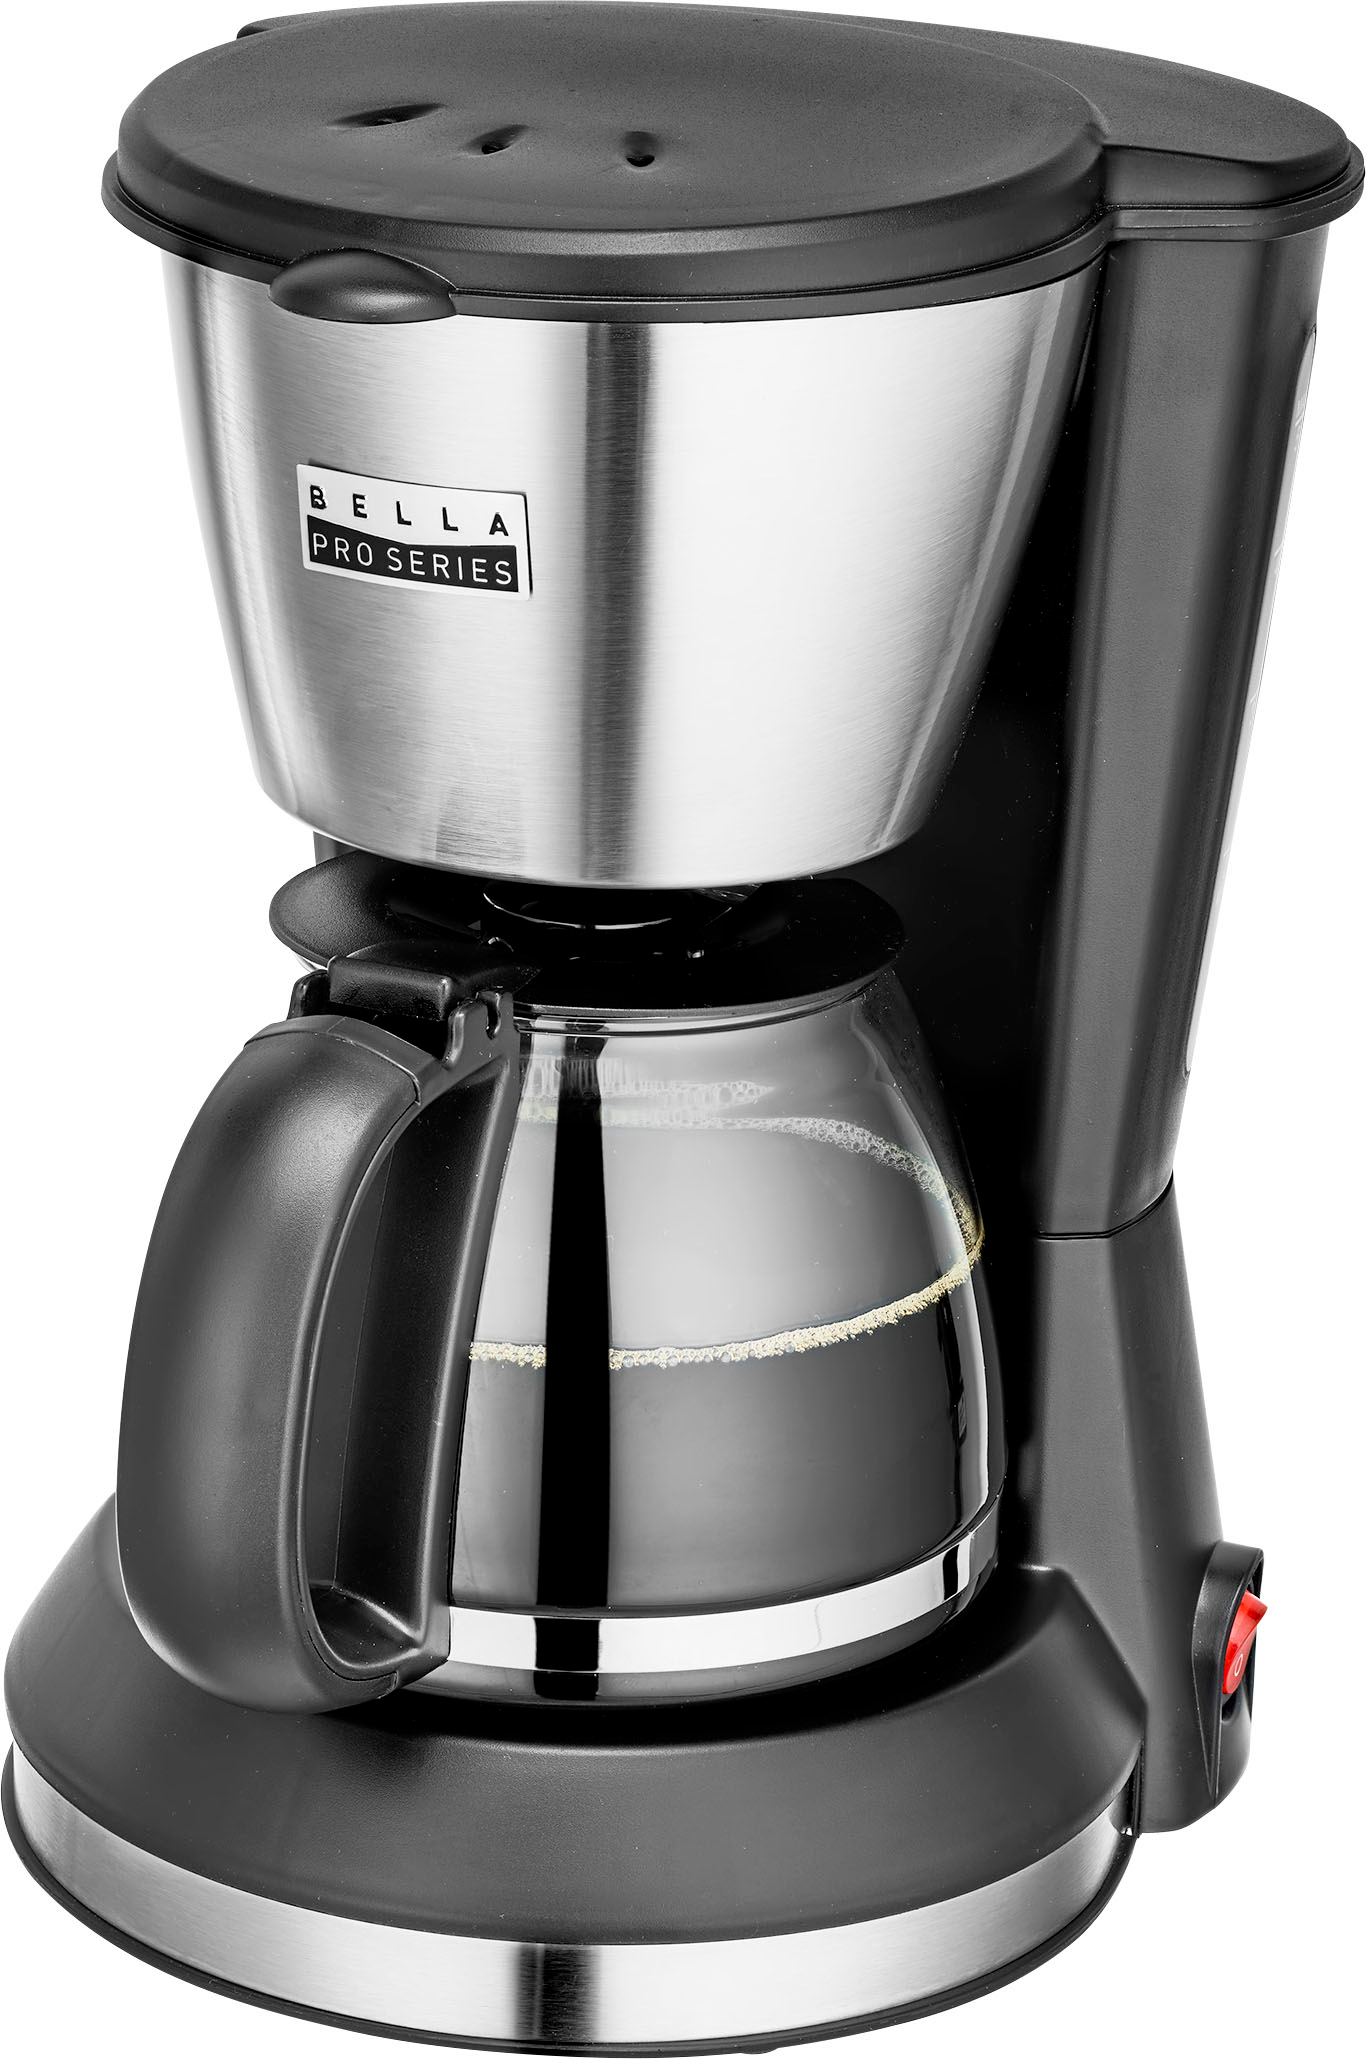 Left View: Bella Pro Series - 5-Cup Coffee Maker - Stainless Steel